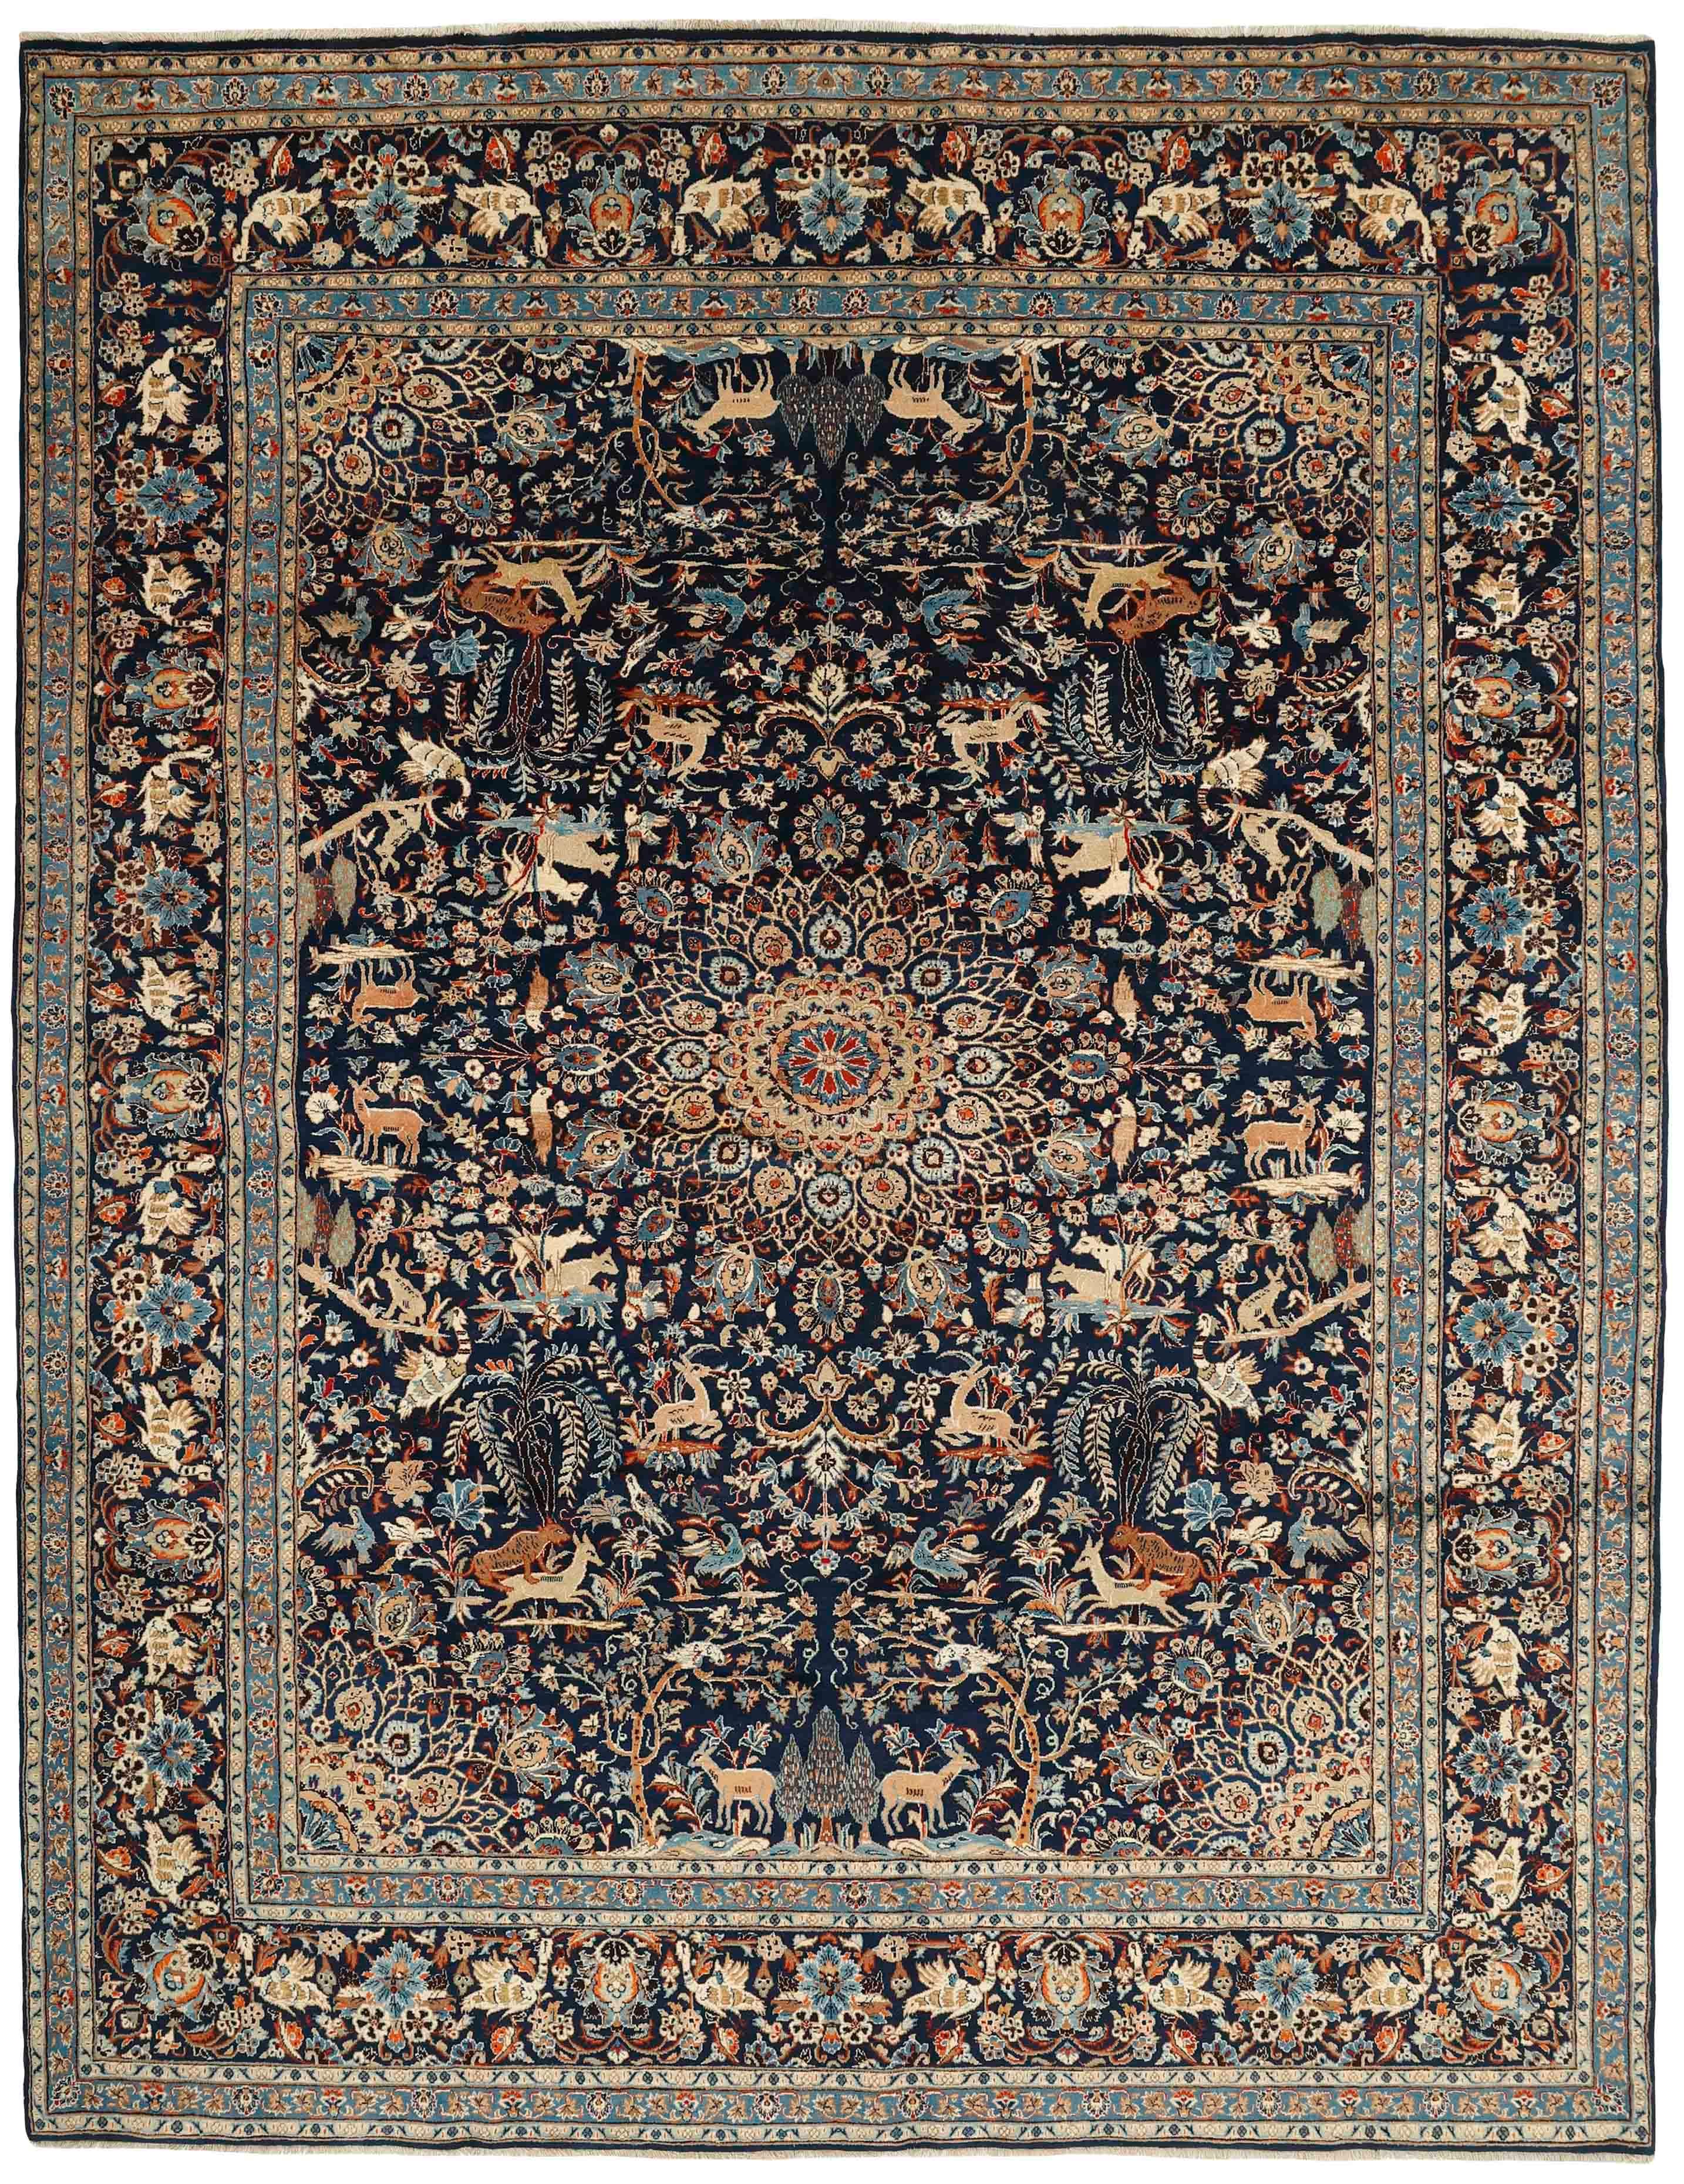 Authentic persian rug with a traditional floral design in multicolour